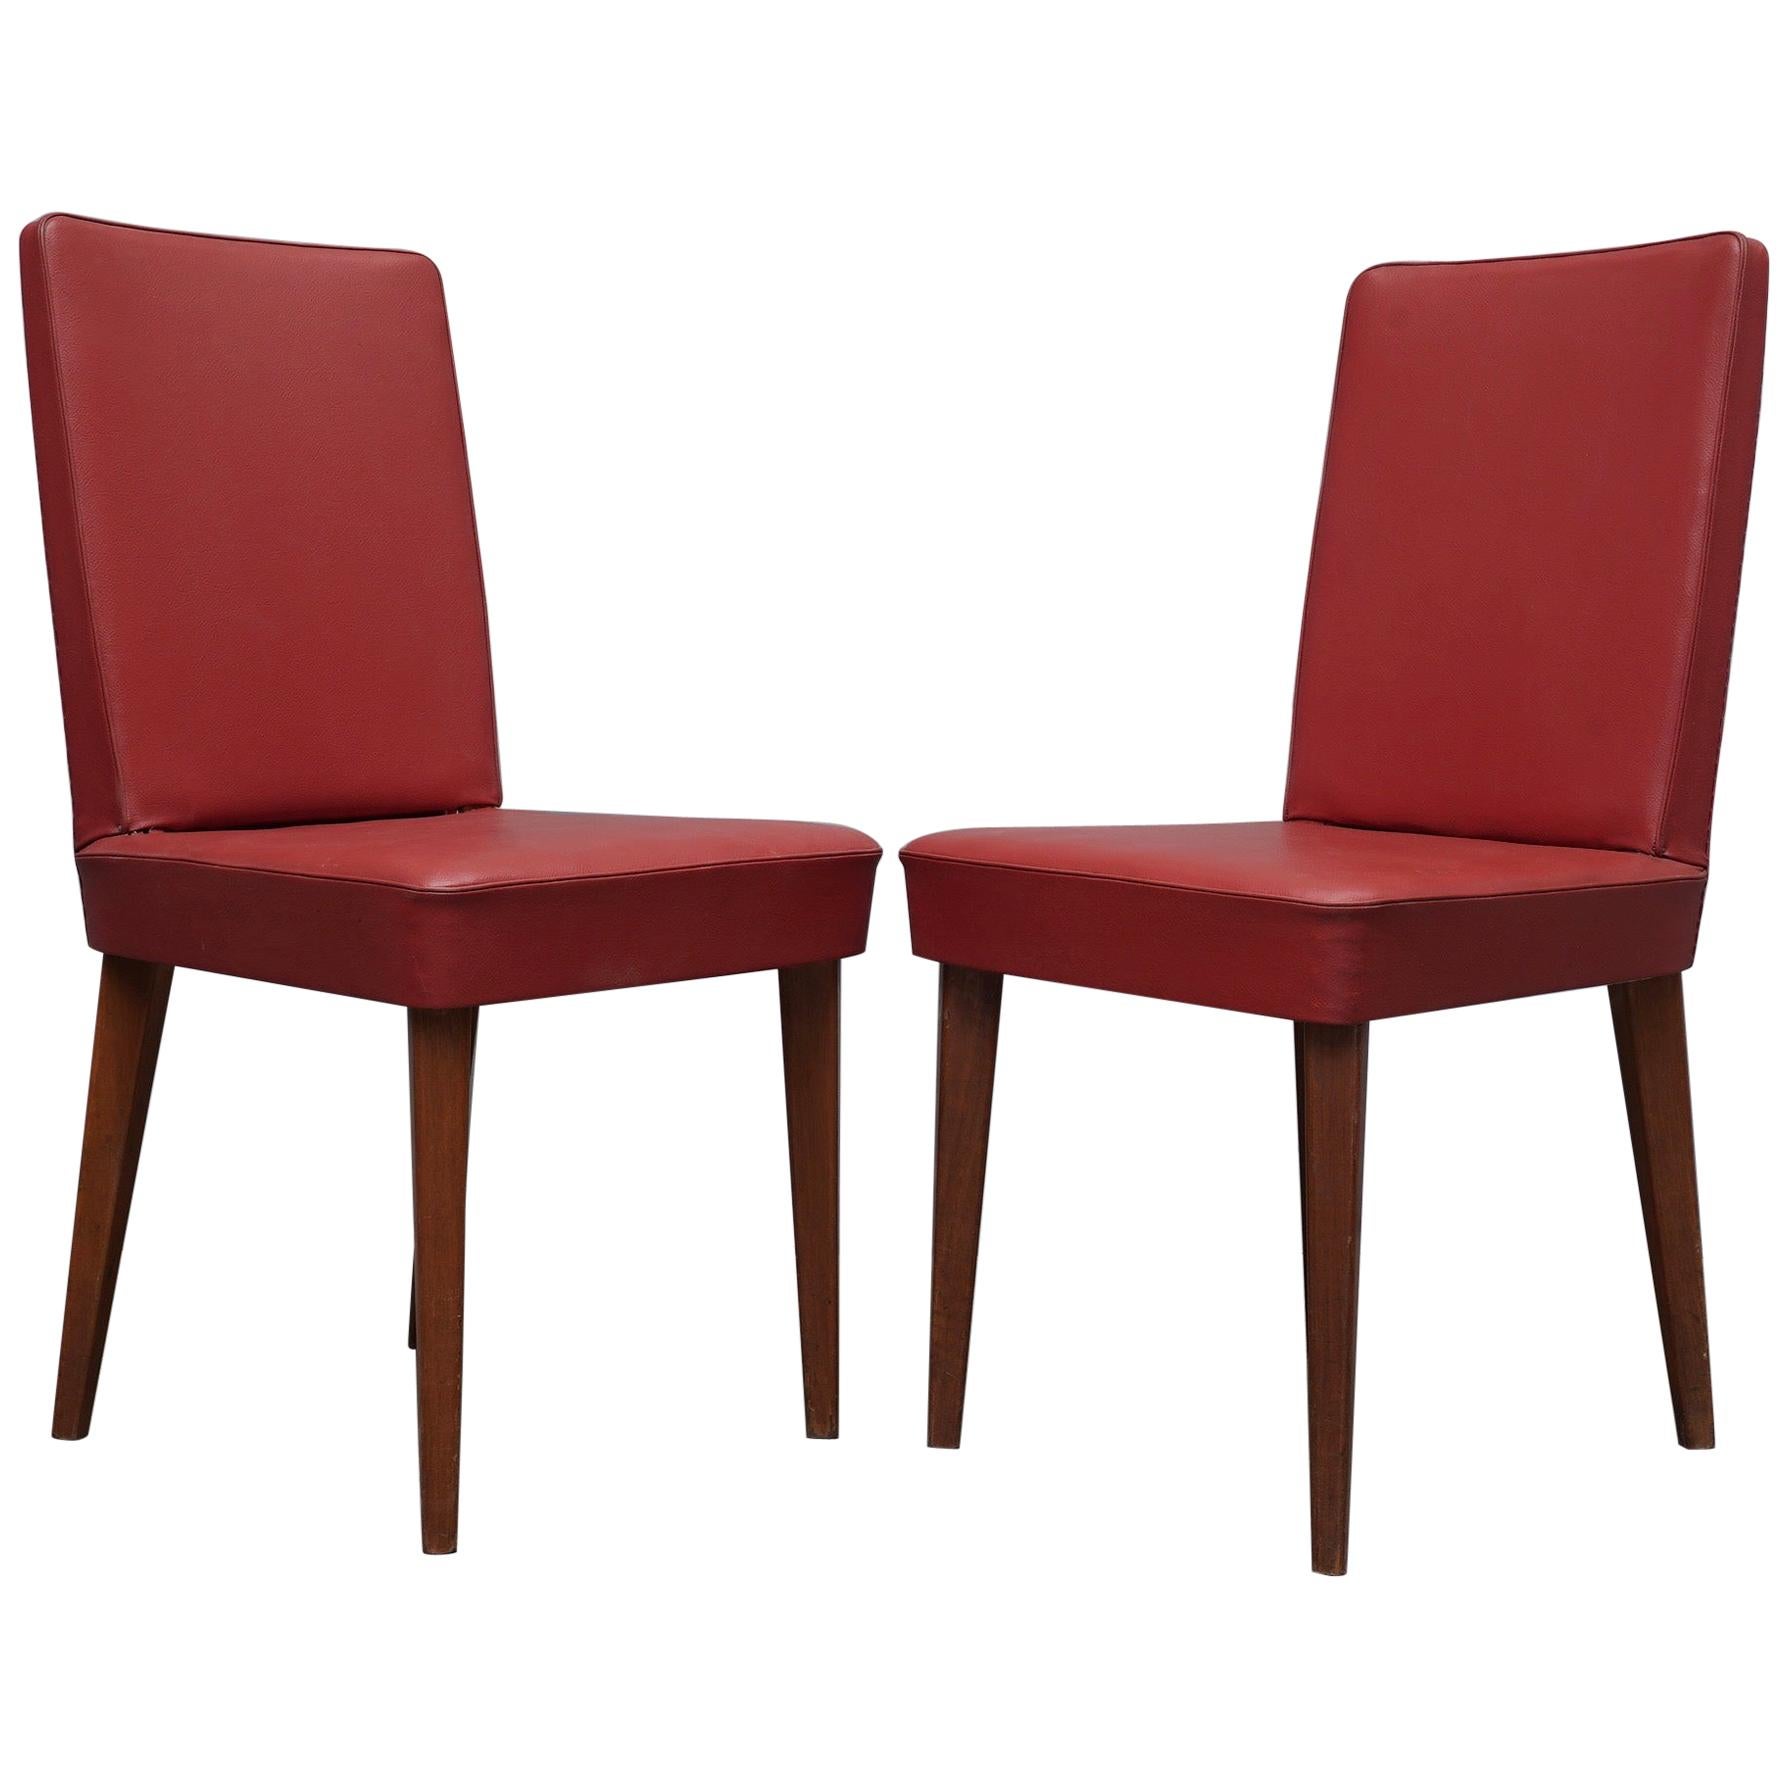 Pair of Anonima Castelli Bologna Red Leather Italian Midcentury Chair, 1960